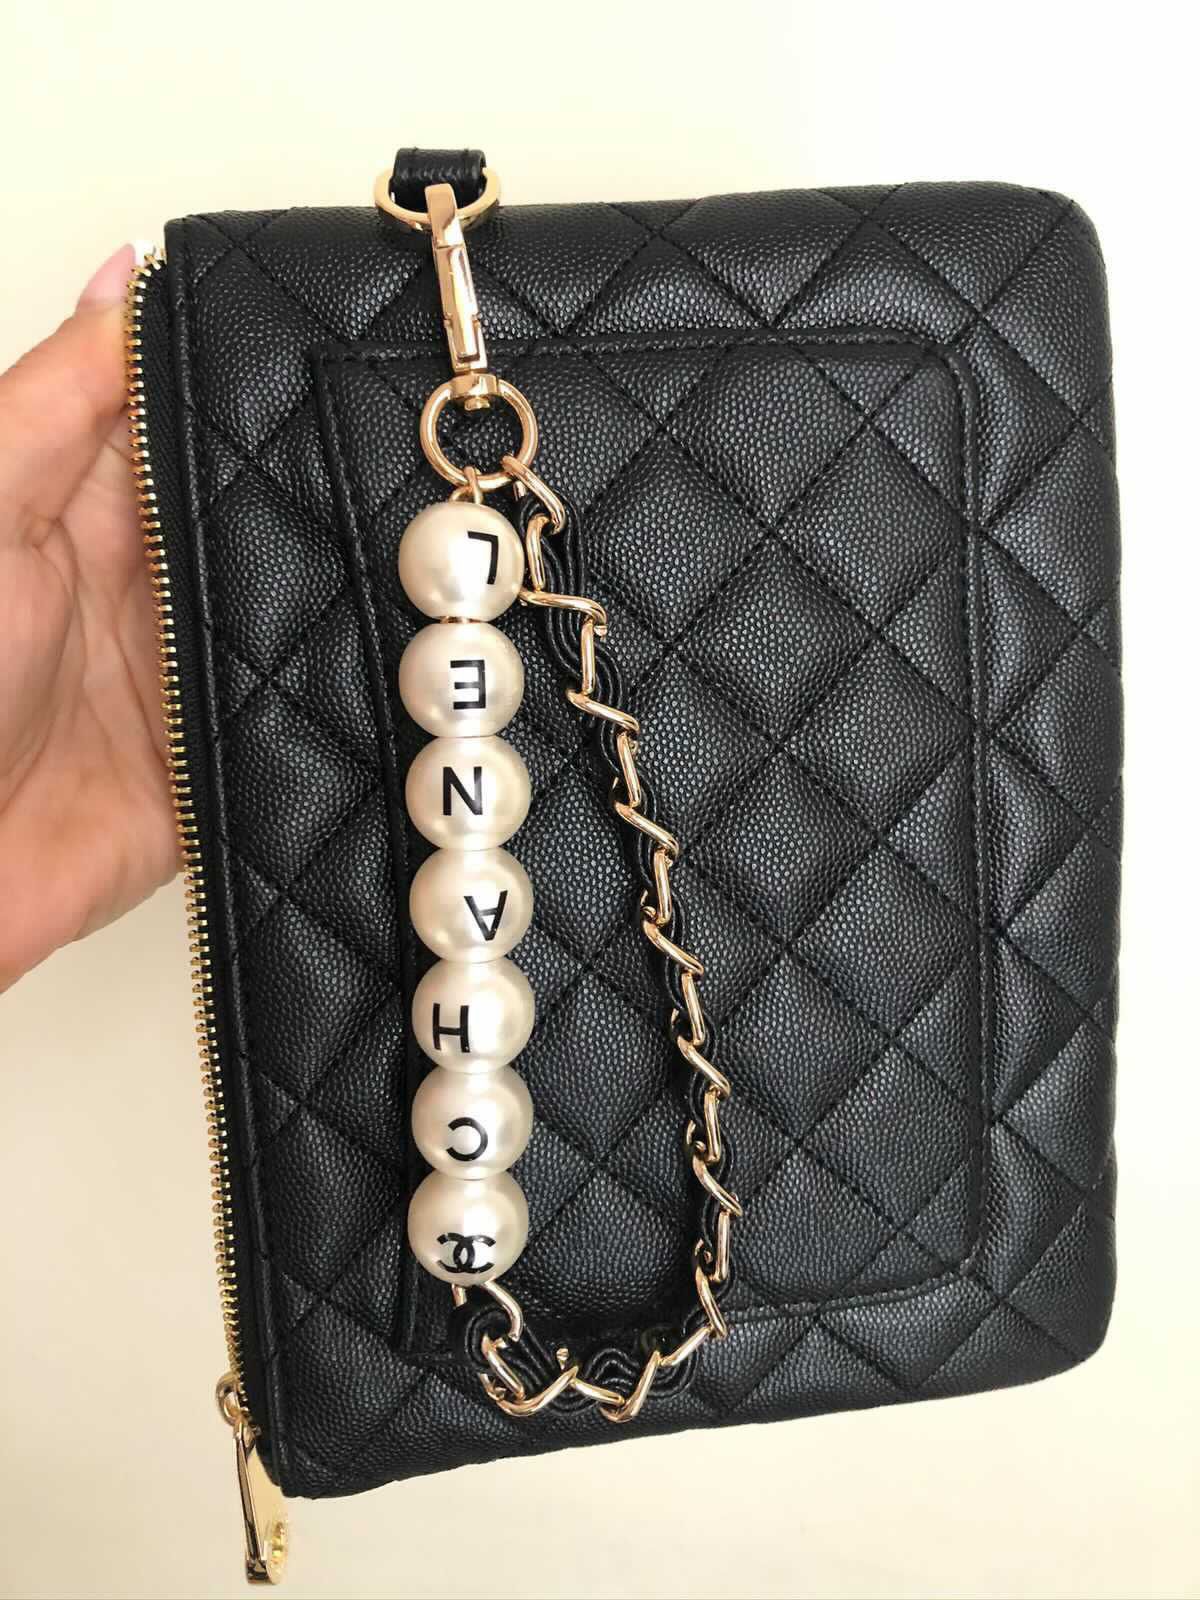 New Chanel Black Purse With A Pearl Hand Strap, Includes Chanel Box,  VIP GIFT